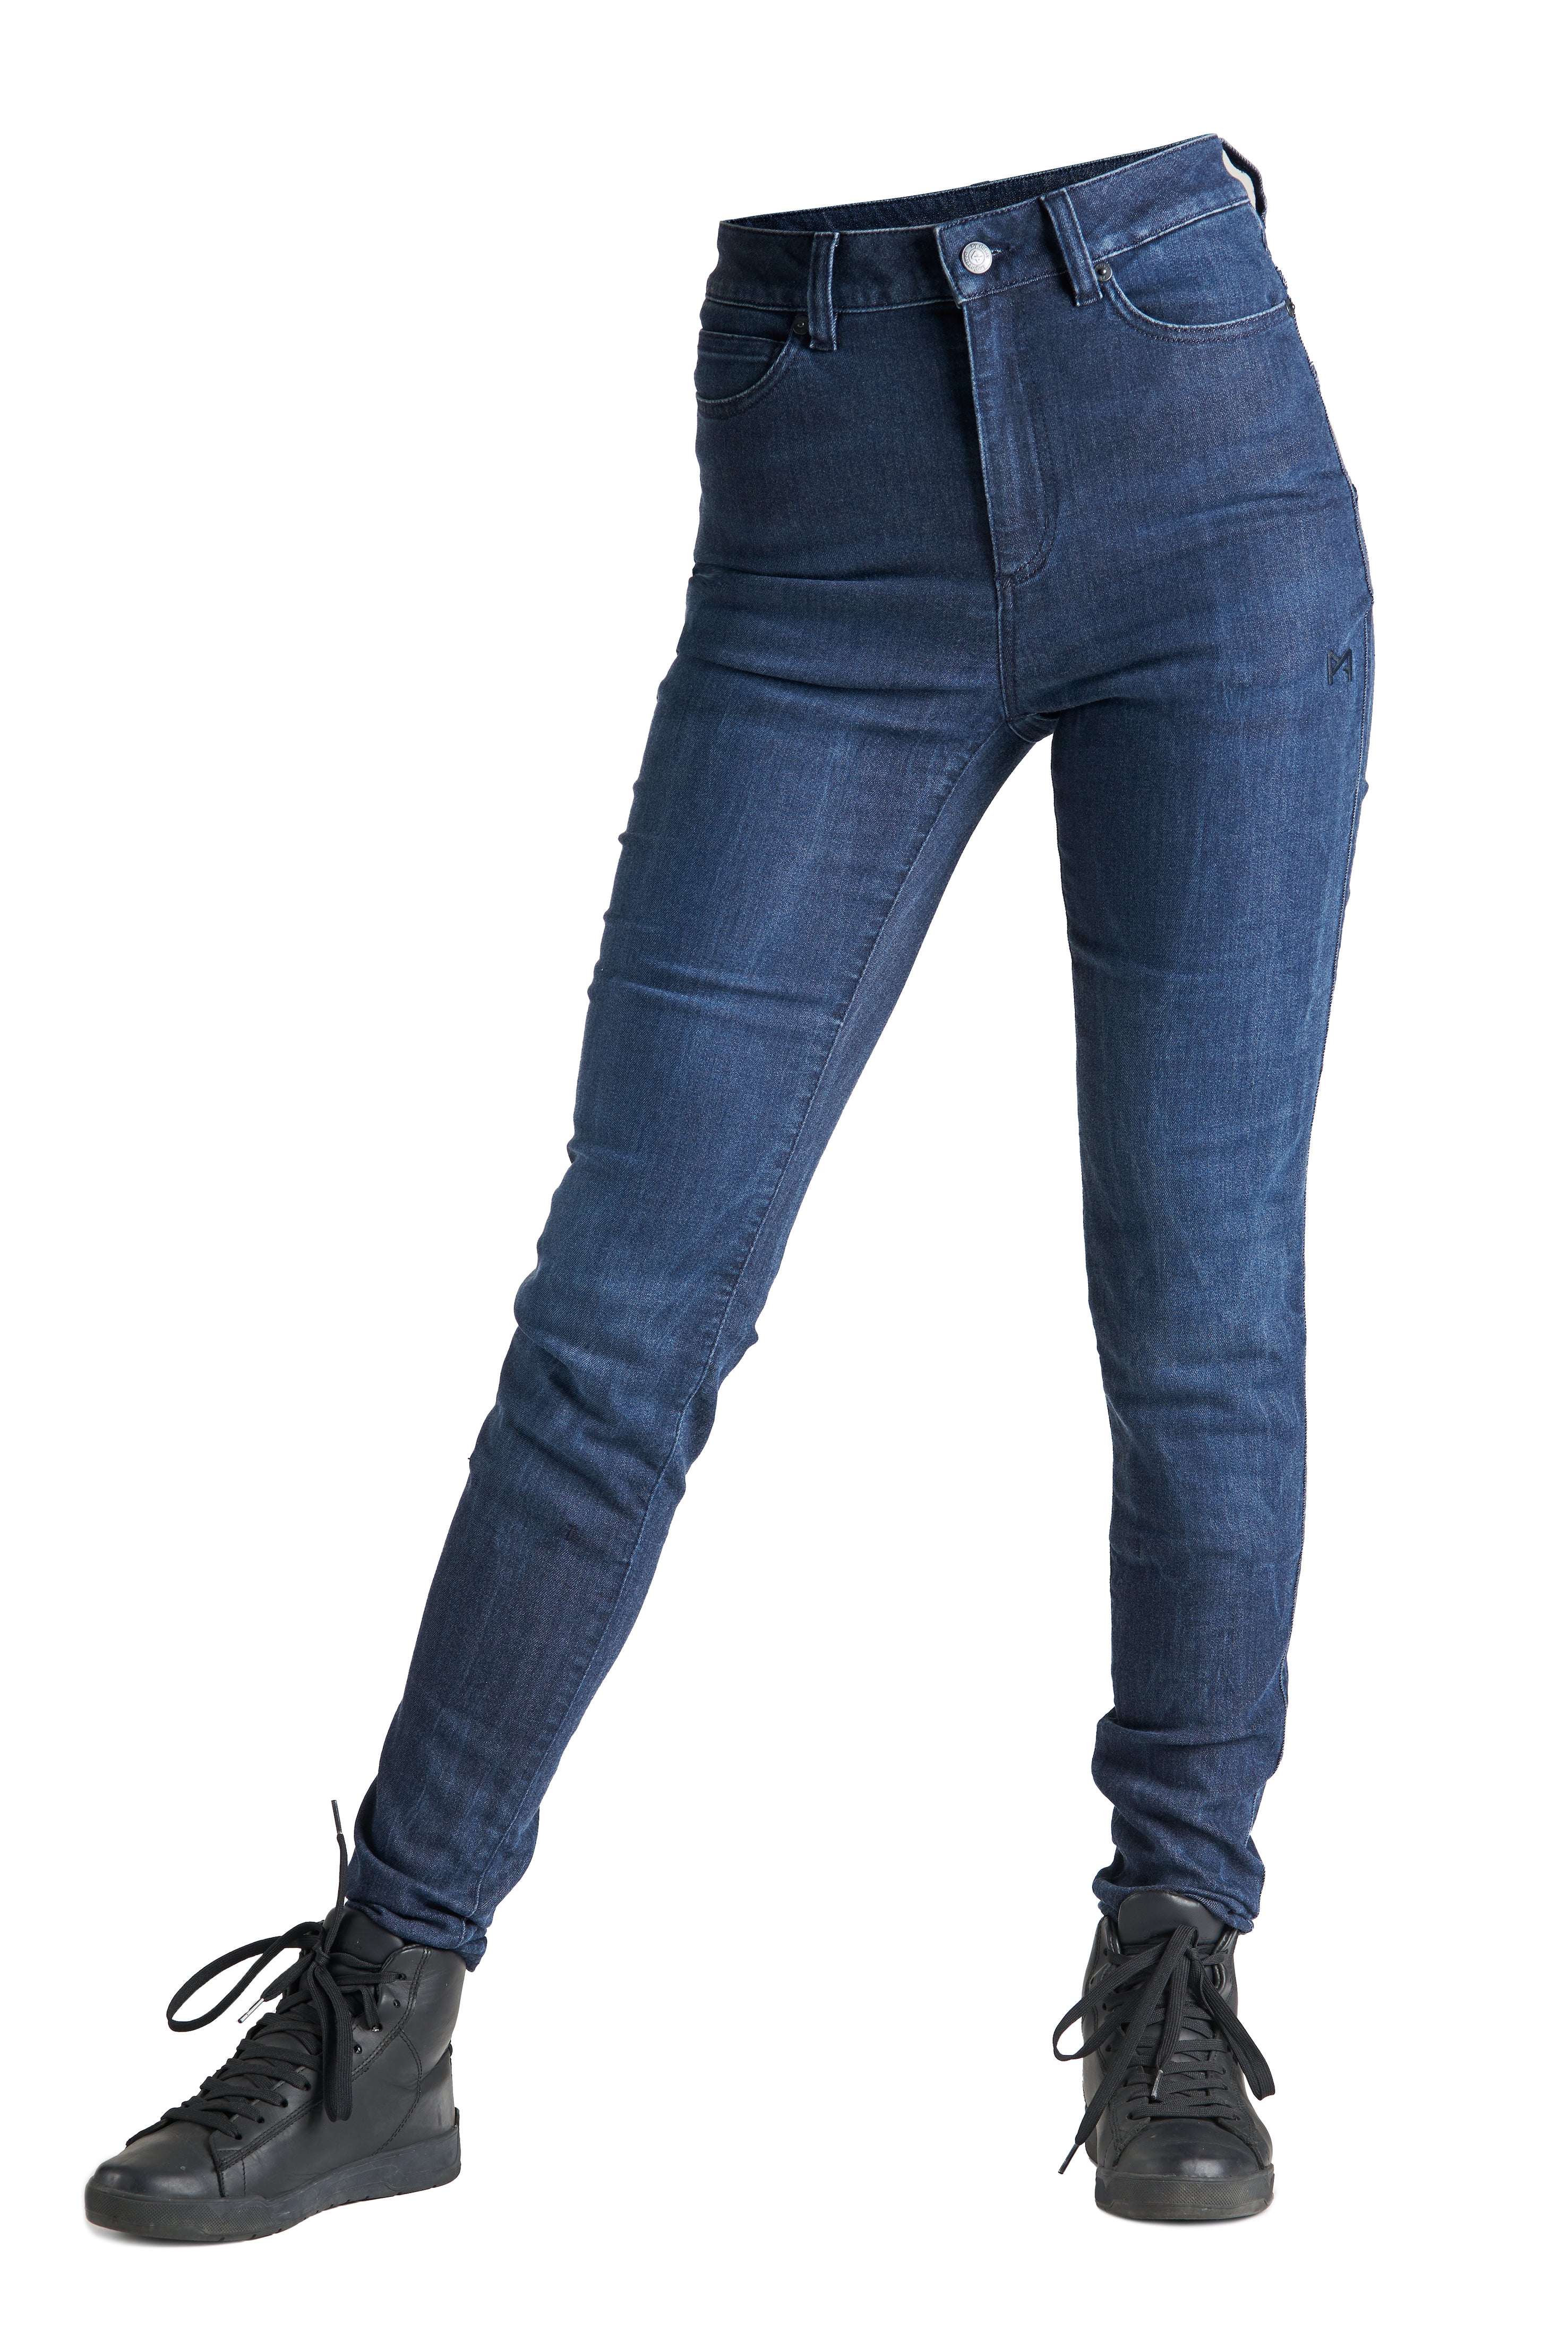 Woman's motorcycle blue jeans